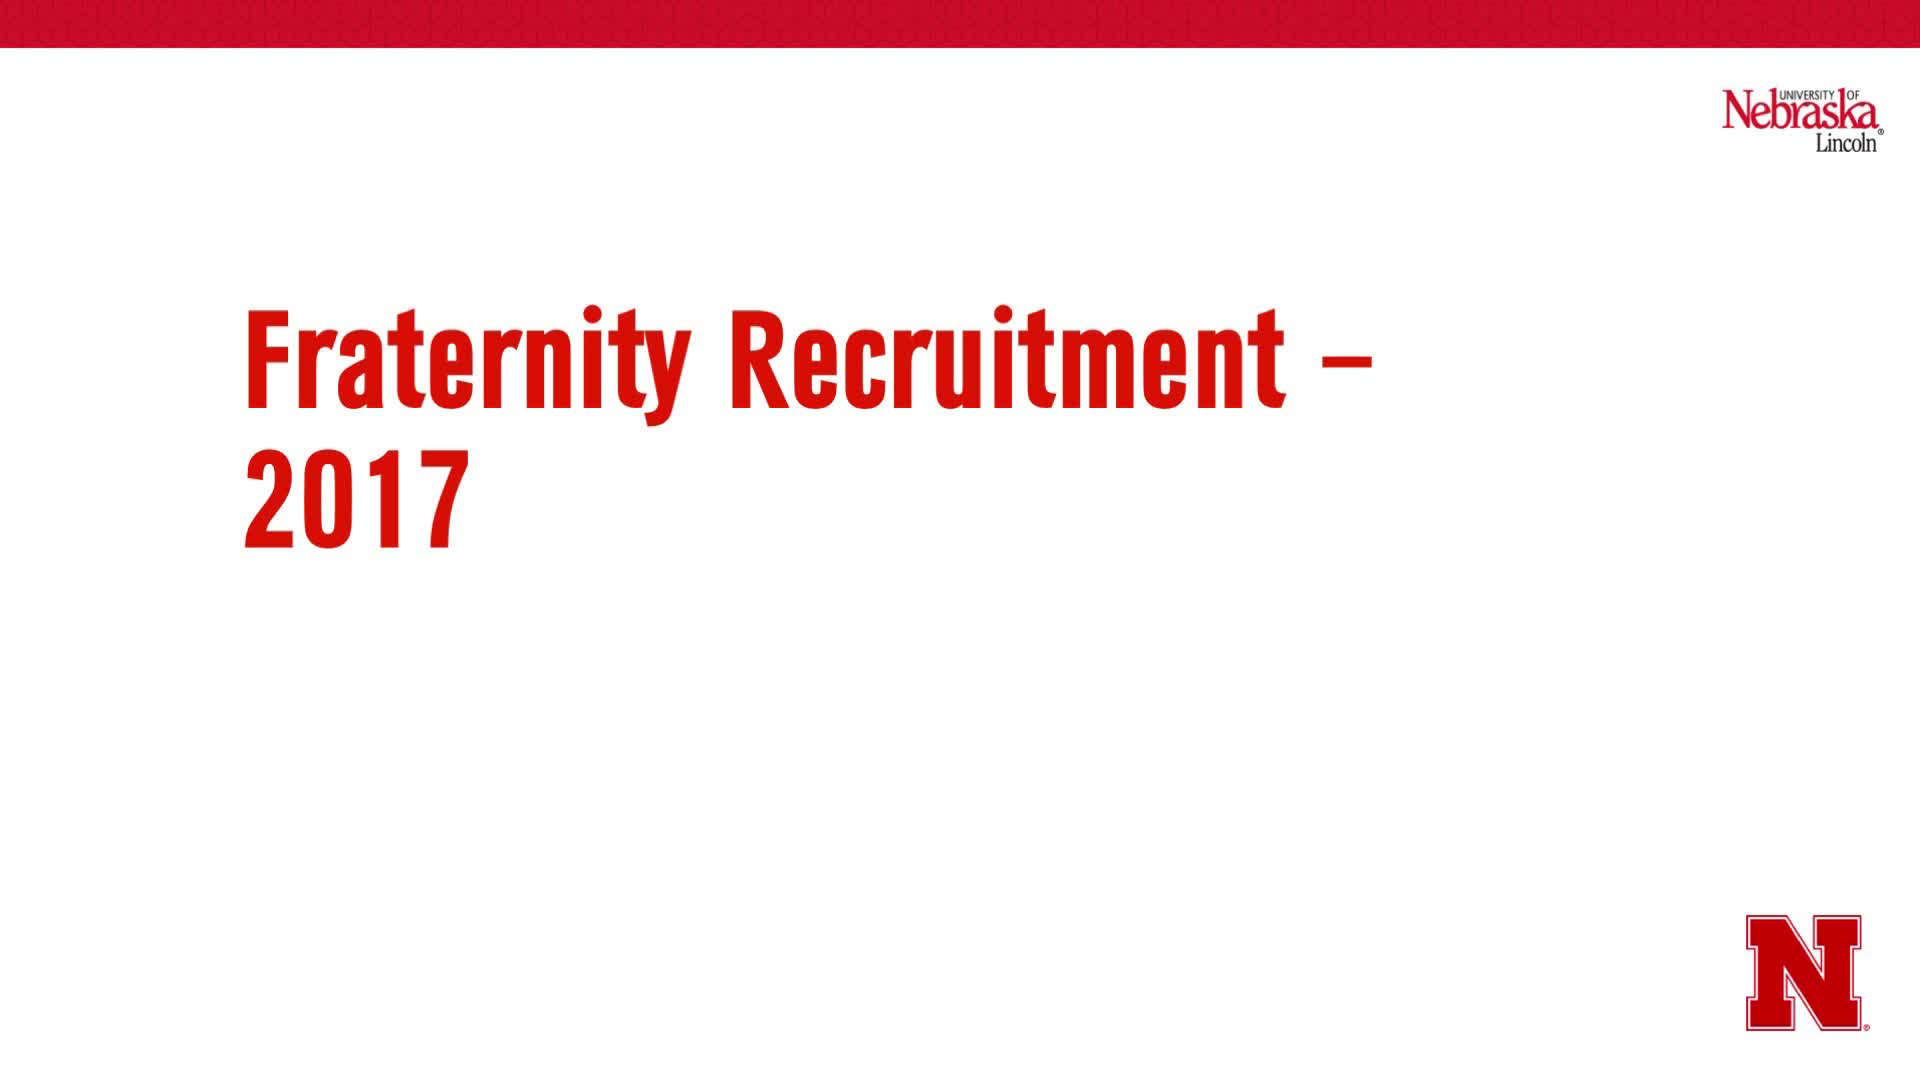 Interfraternity Council Recruitment